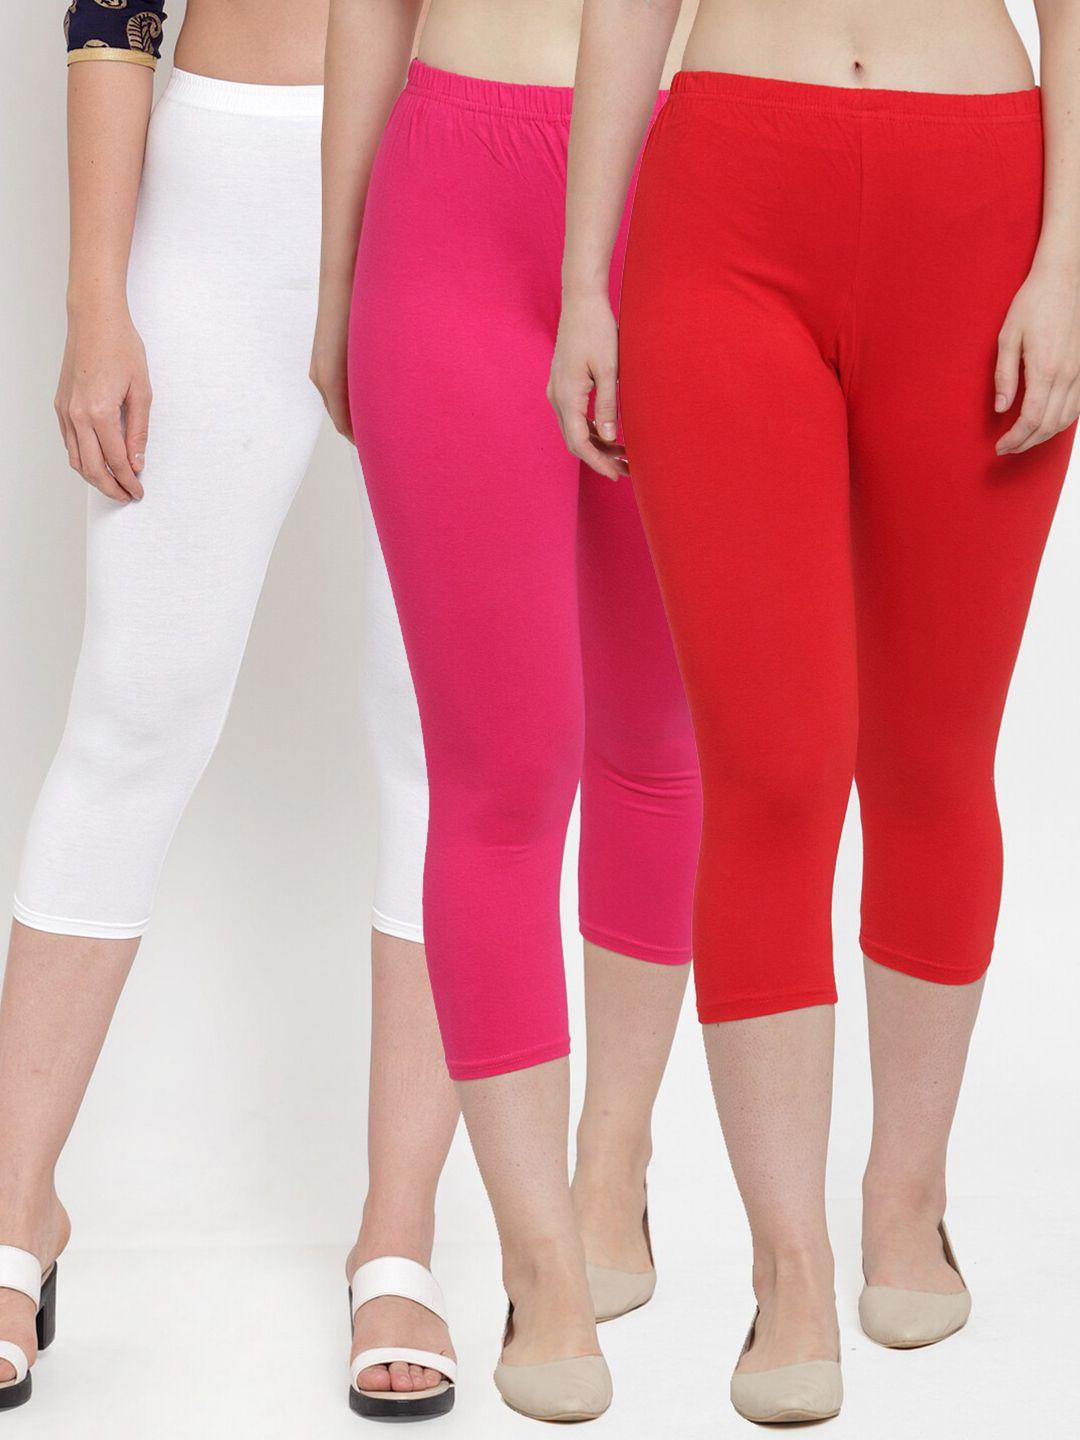 gracit women pack of 3 red & white solid regular-fit capris